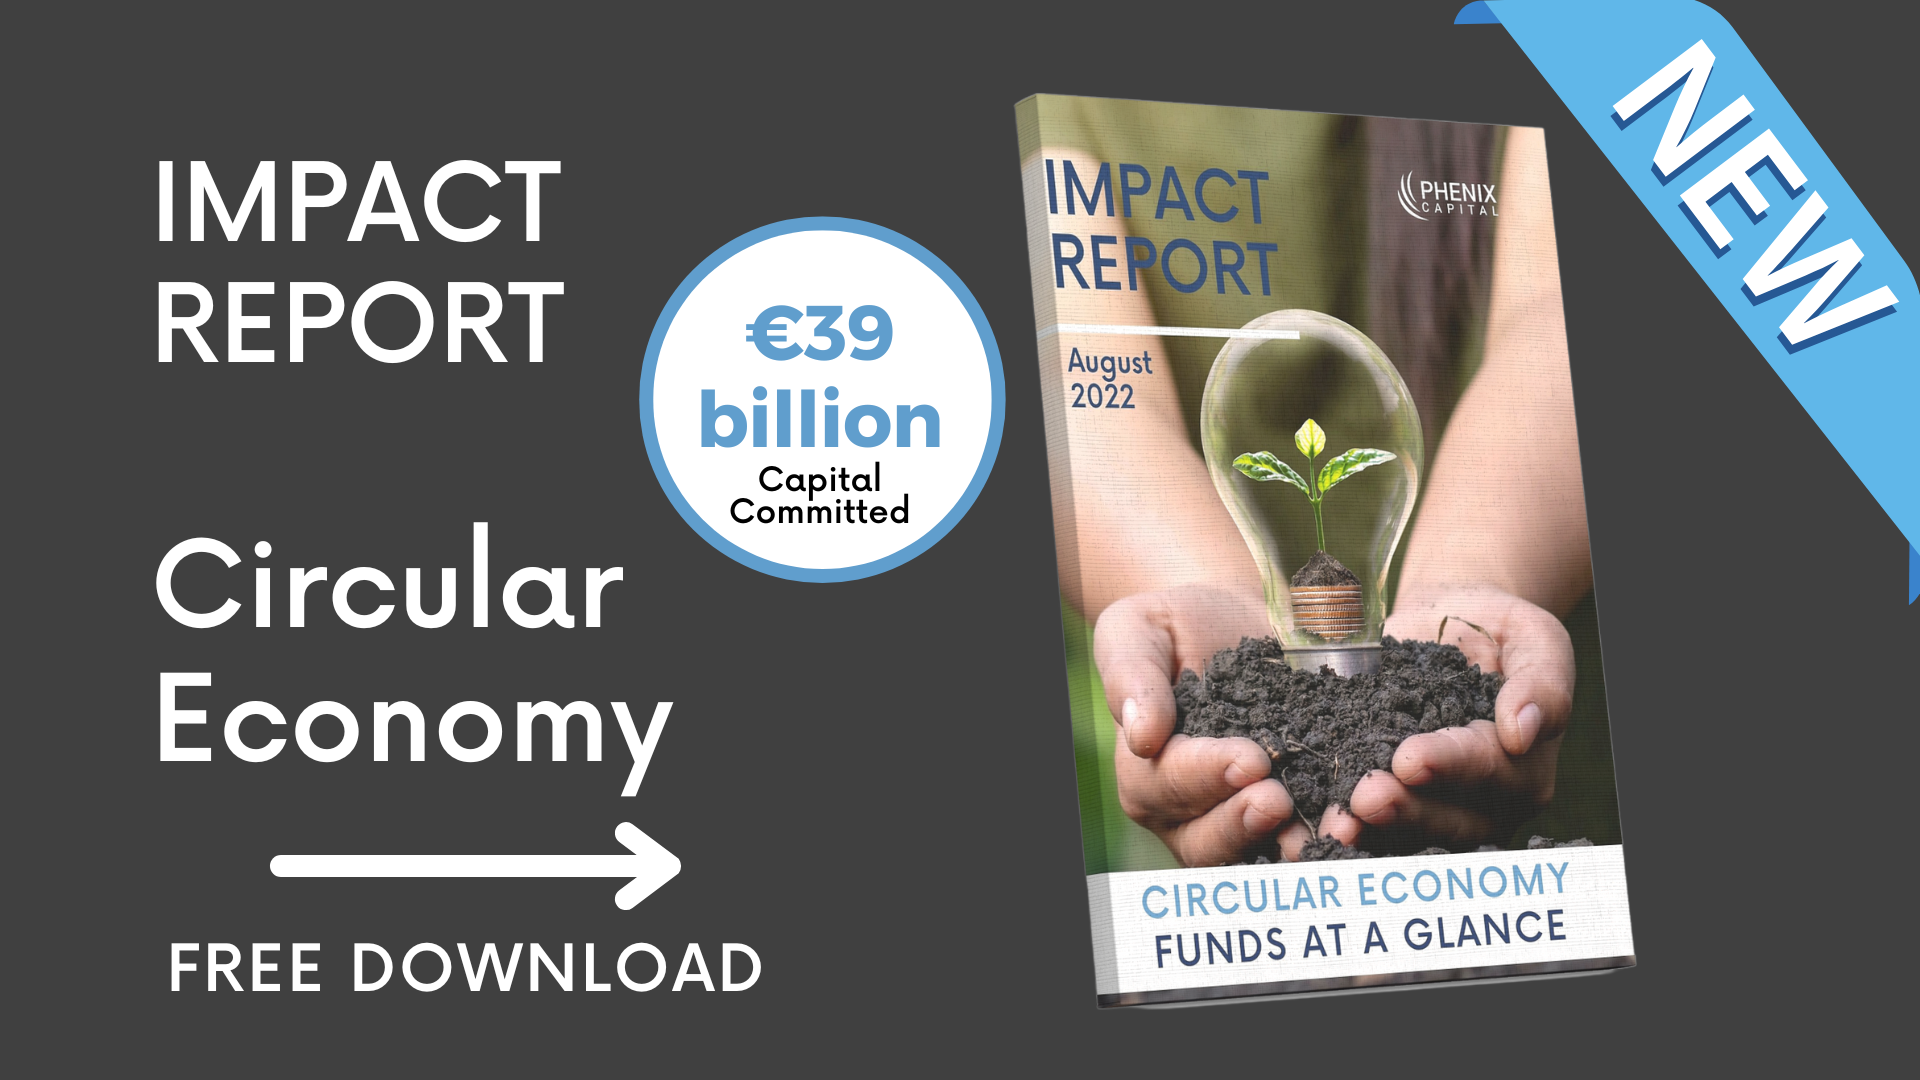 PRESS RELEASE: Exponentially increase in number of Impact funds targeting Circular Economy since 2019